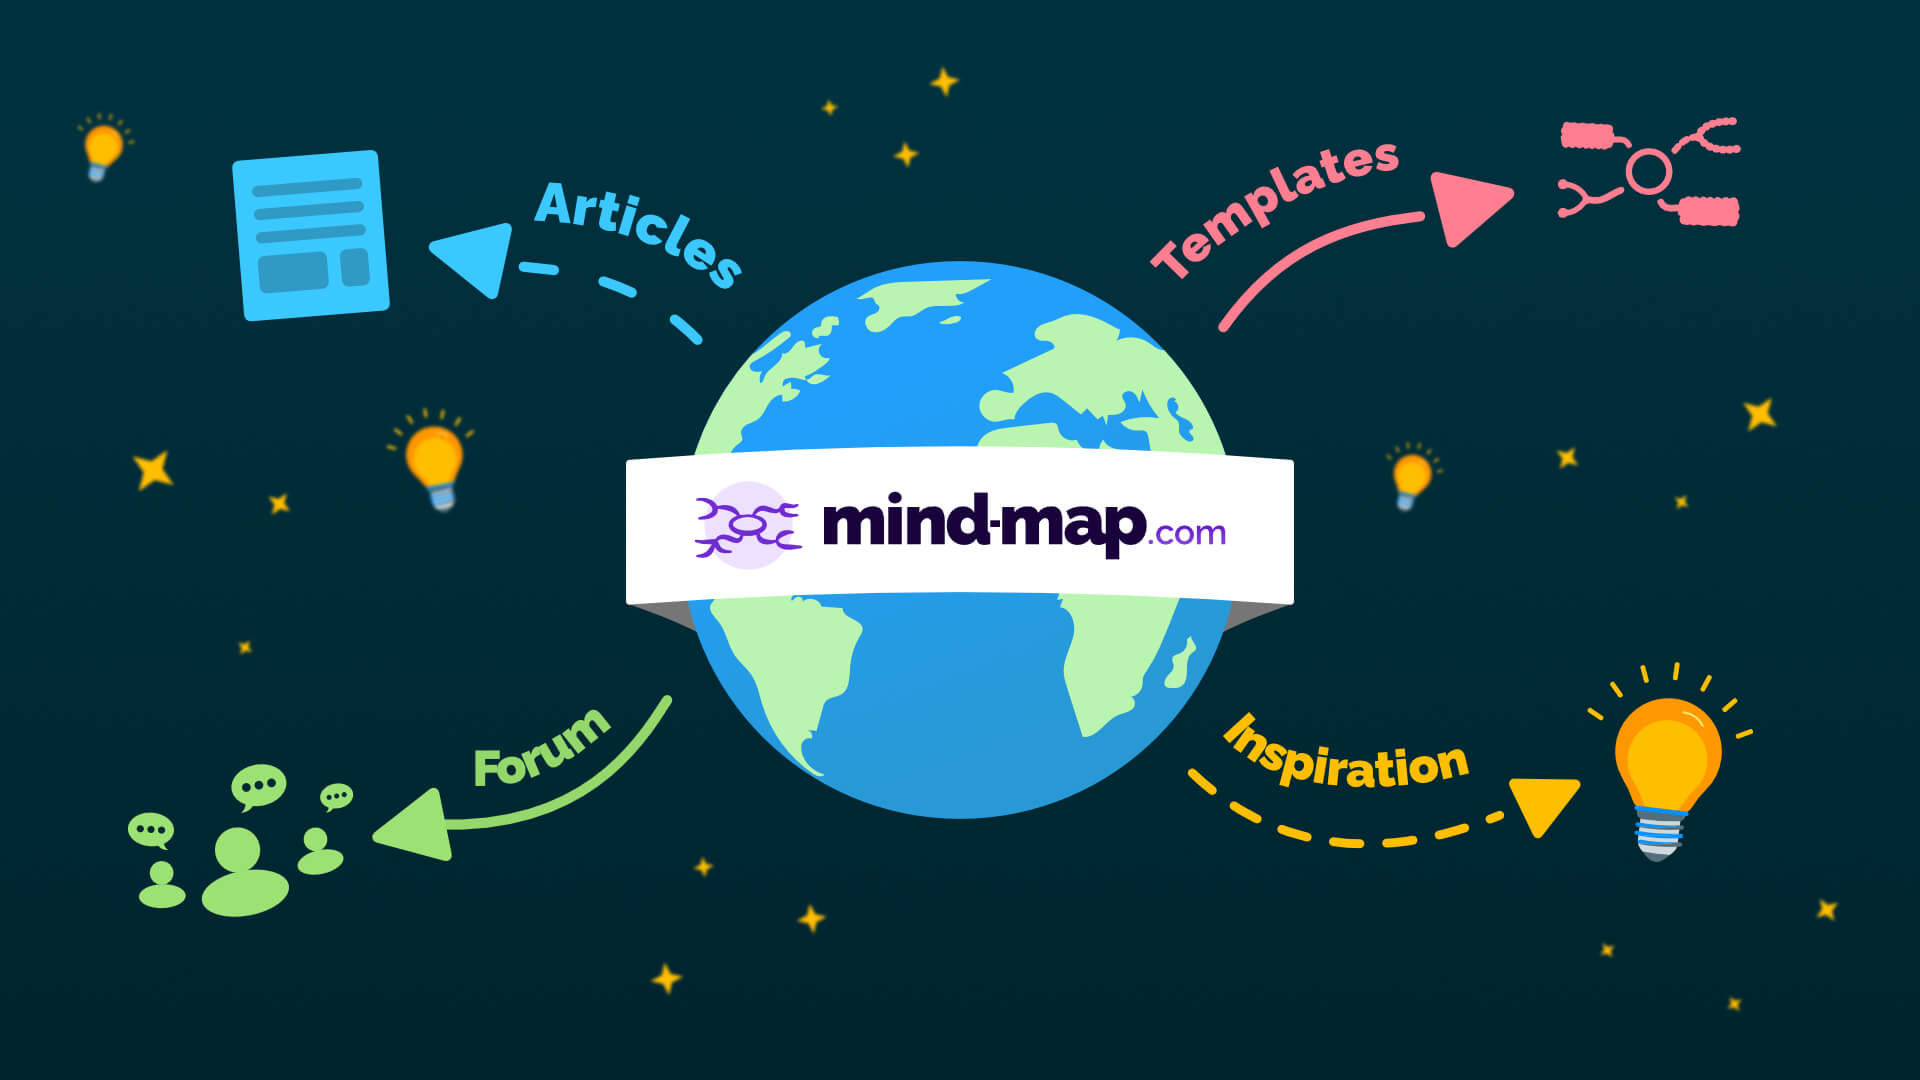 Ayoa | Welcome to the world of mind mapping